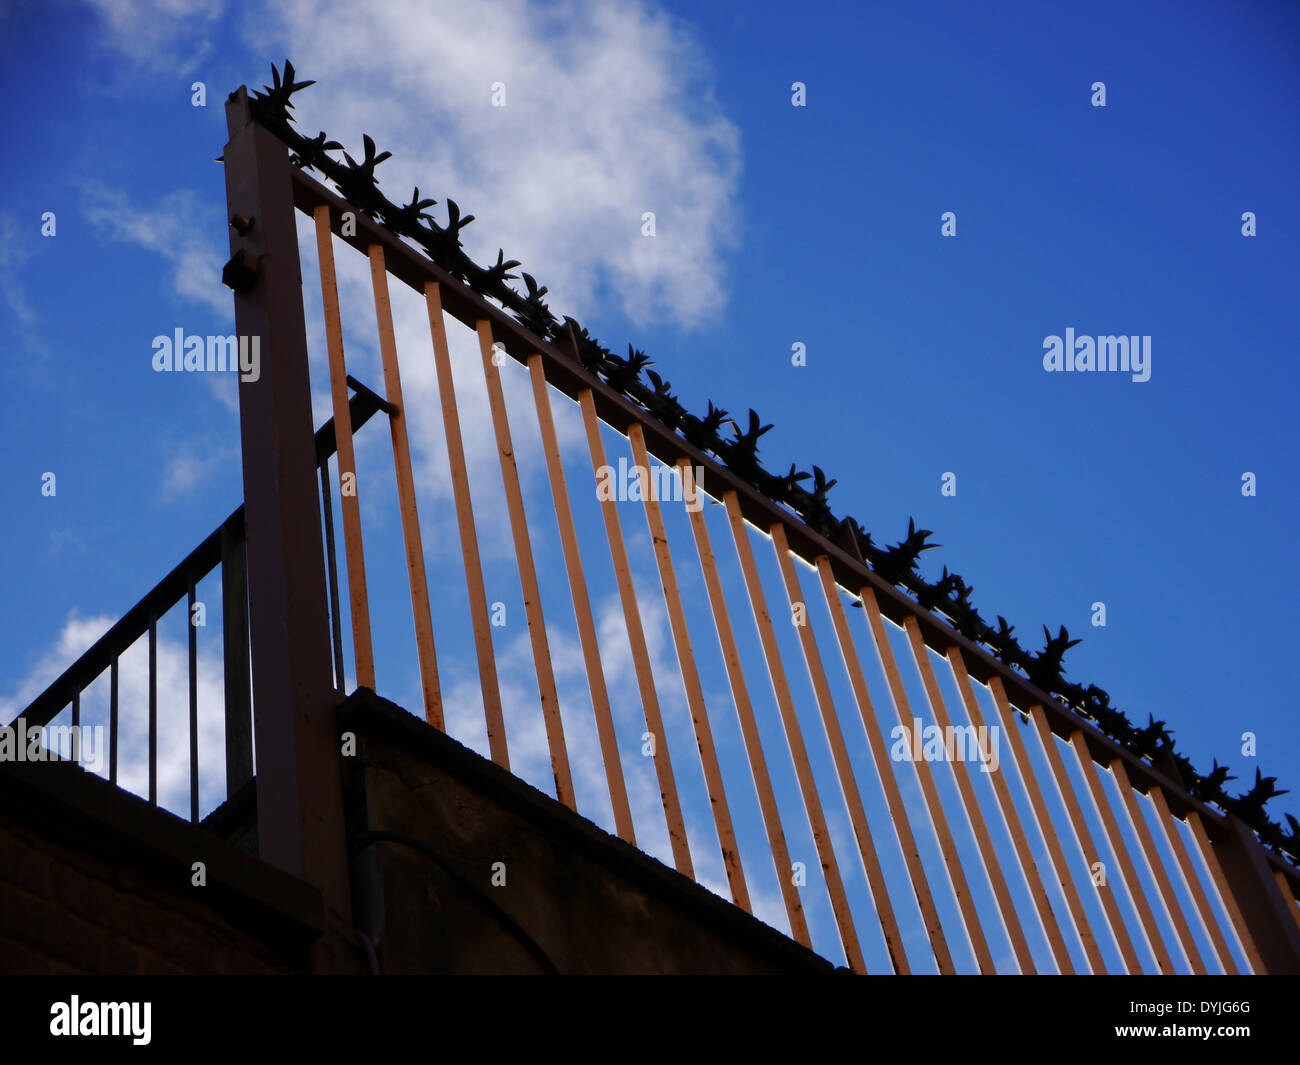 Cactus anti-burglary / theft / crime security / protection measures on a fence Stock Photo